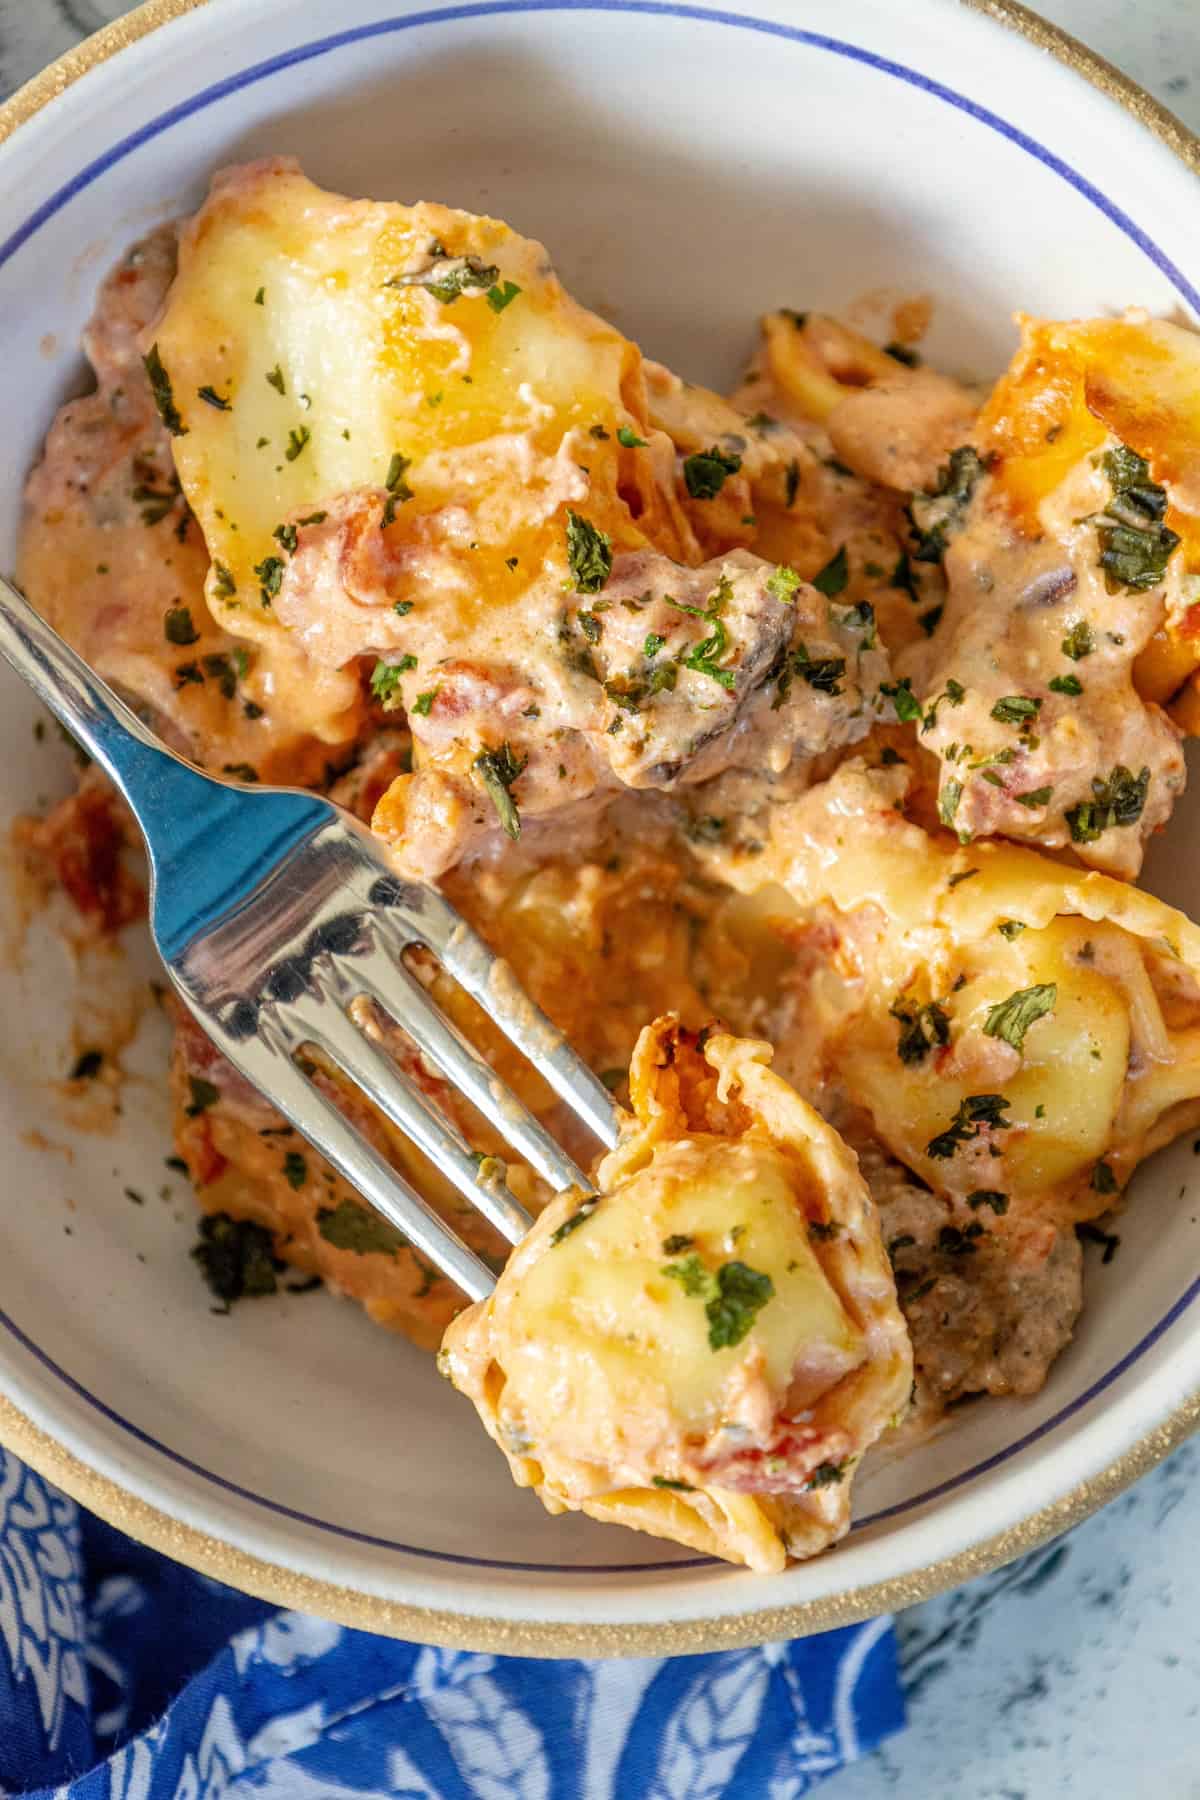 A cheesy bowl of tortellini pasta with meat in it.